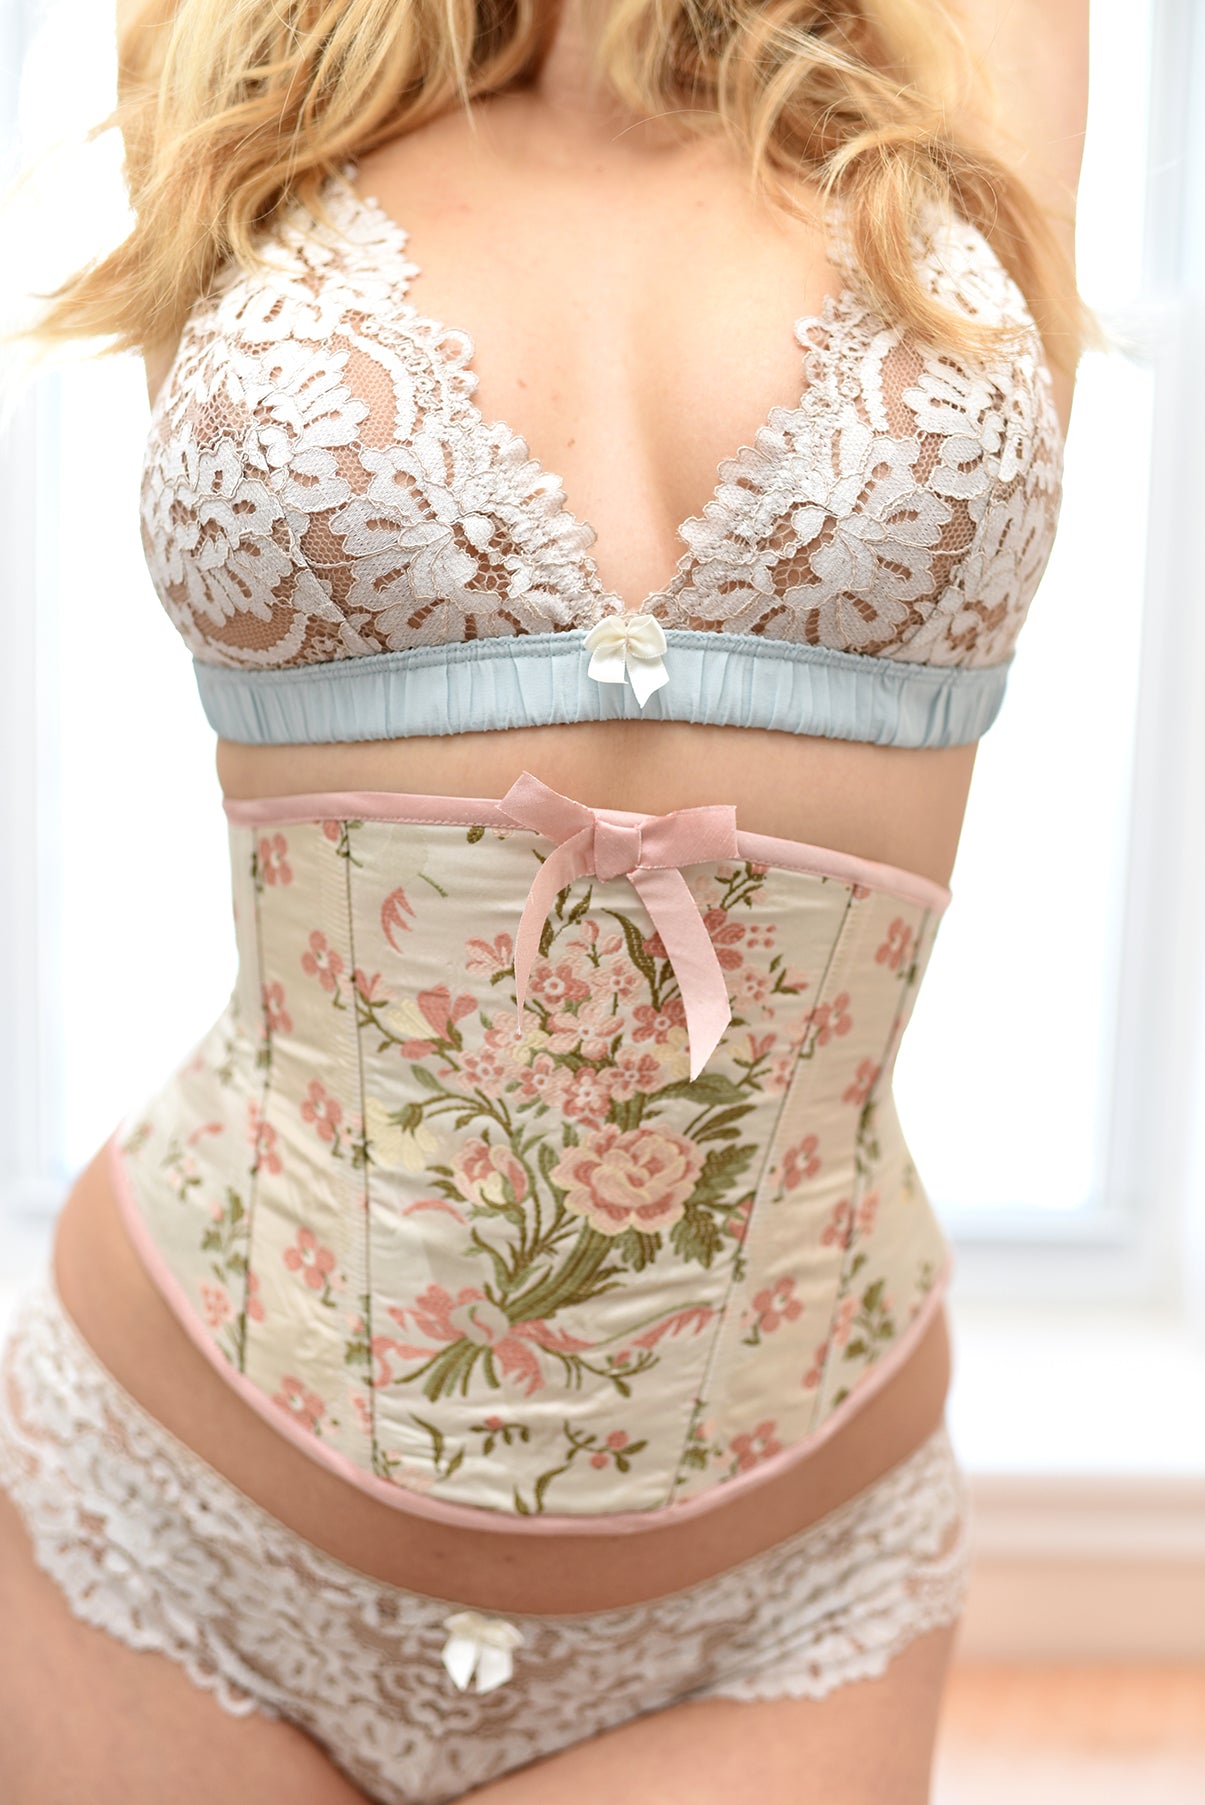 Marie Antoinette style lace bralette and corset waist cincher with floral brocade design